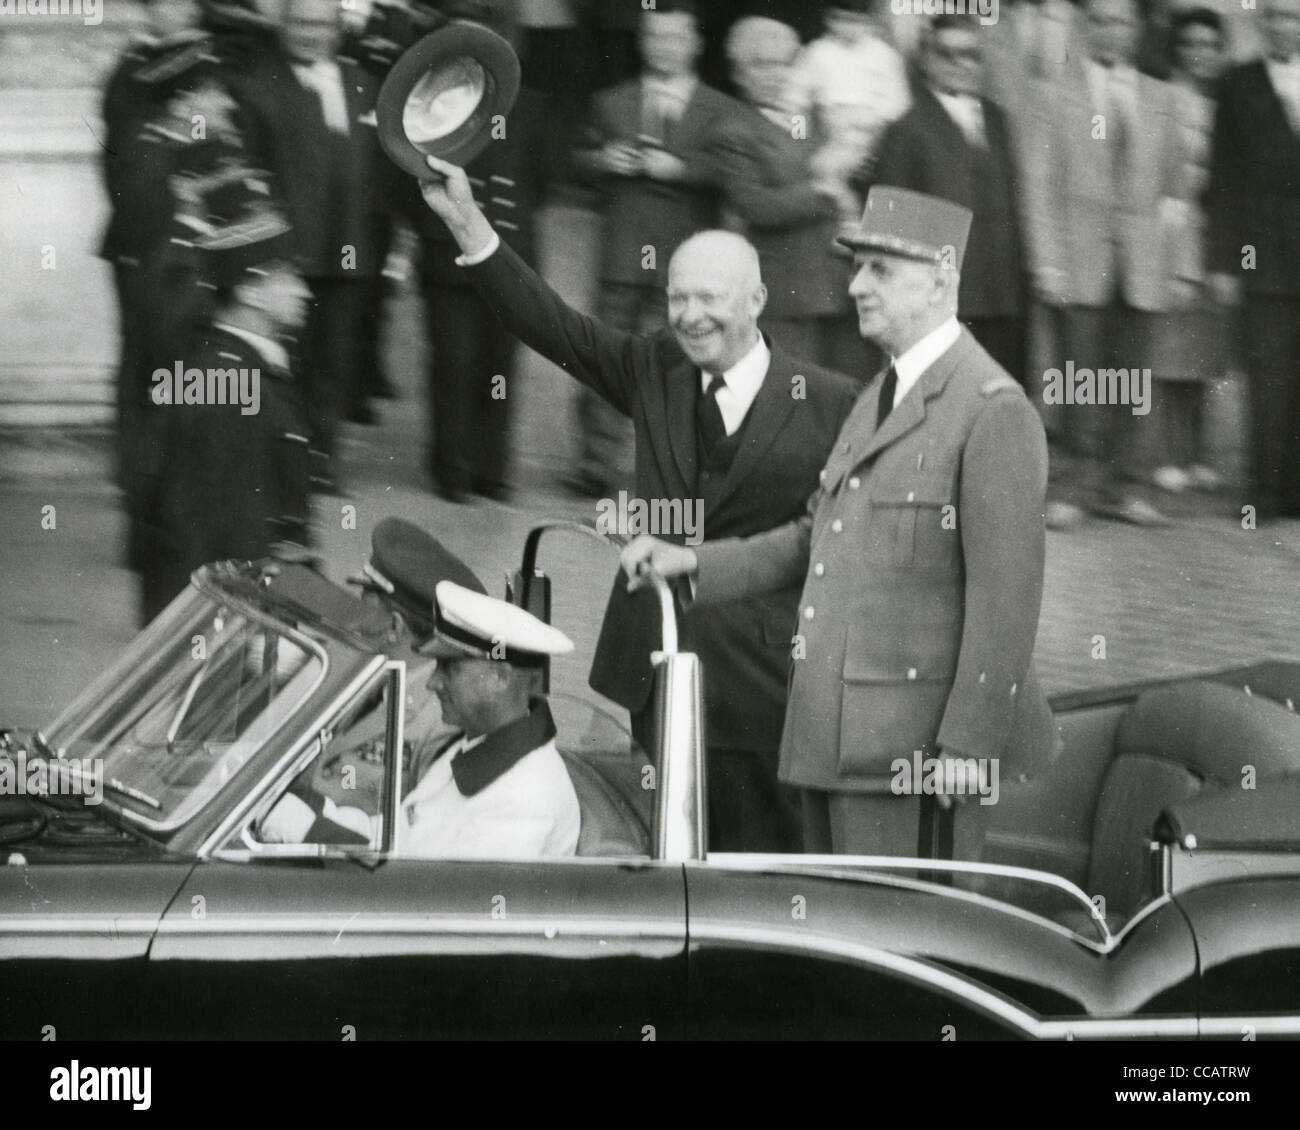 US PRESIDENT DWIGHT D. EISENHOWER waIves to crowd on visit to Paris with President Charles De Gaulle in 1960 Stock Photo